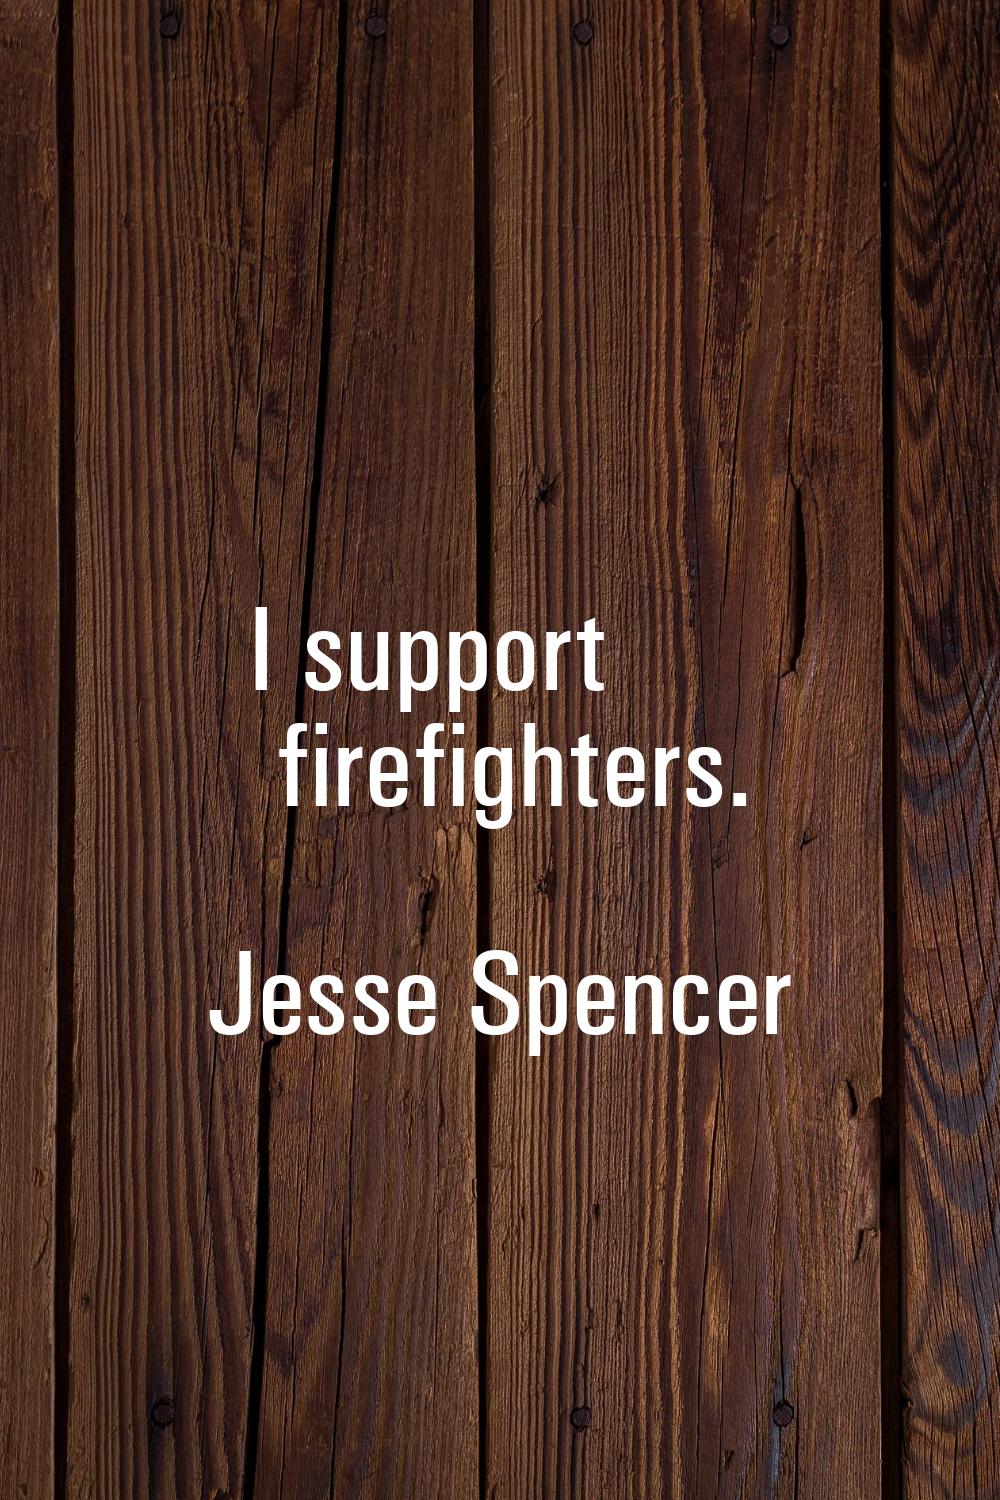 I support firefighters.